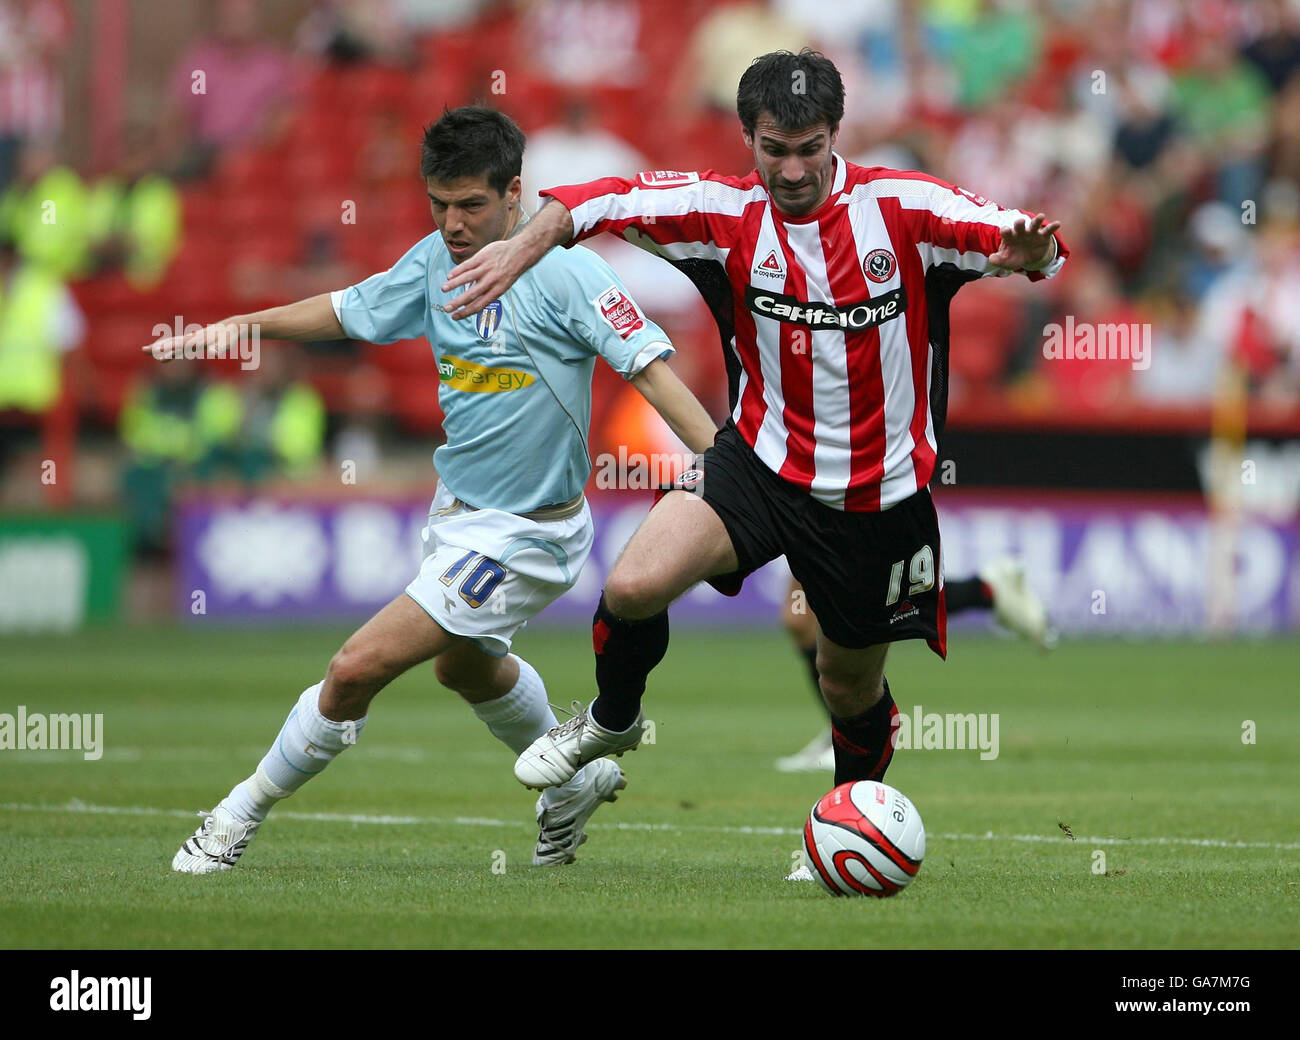 Colchester United's Kemal Izzet (left) and Sheffield United's Keith Gillespie battle for the ball during the Coca-Cola Football League Championship match at Bramall Lane, Sheffield. Stock Photo